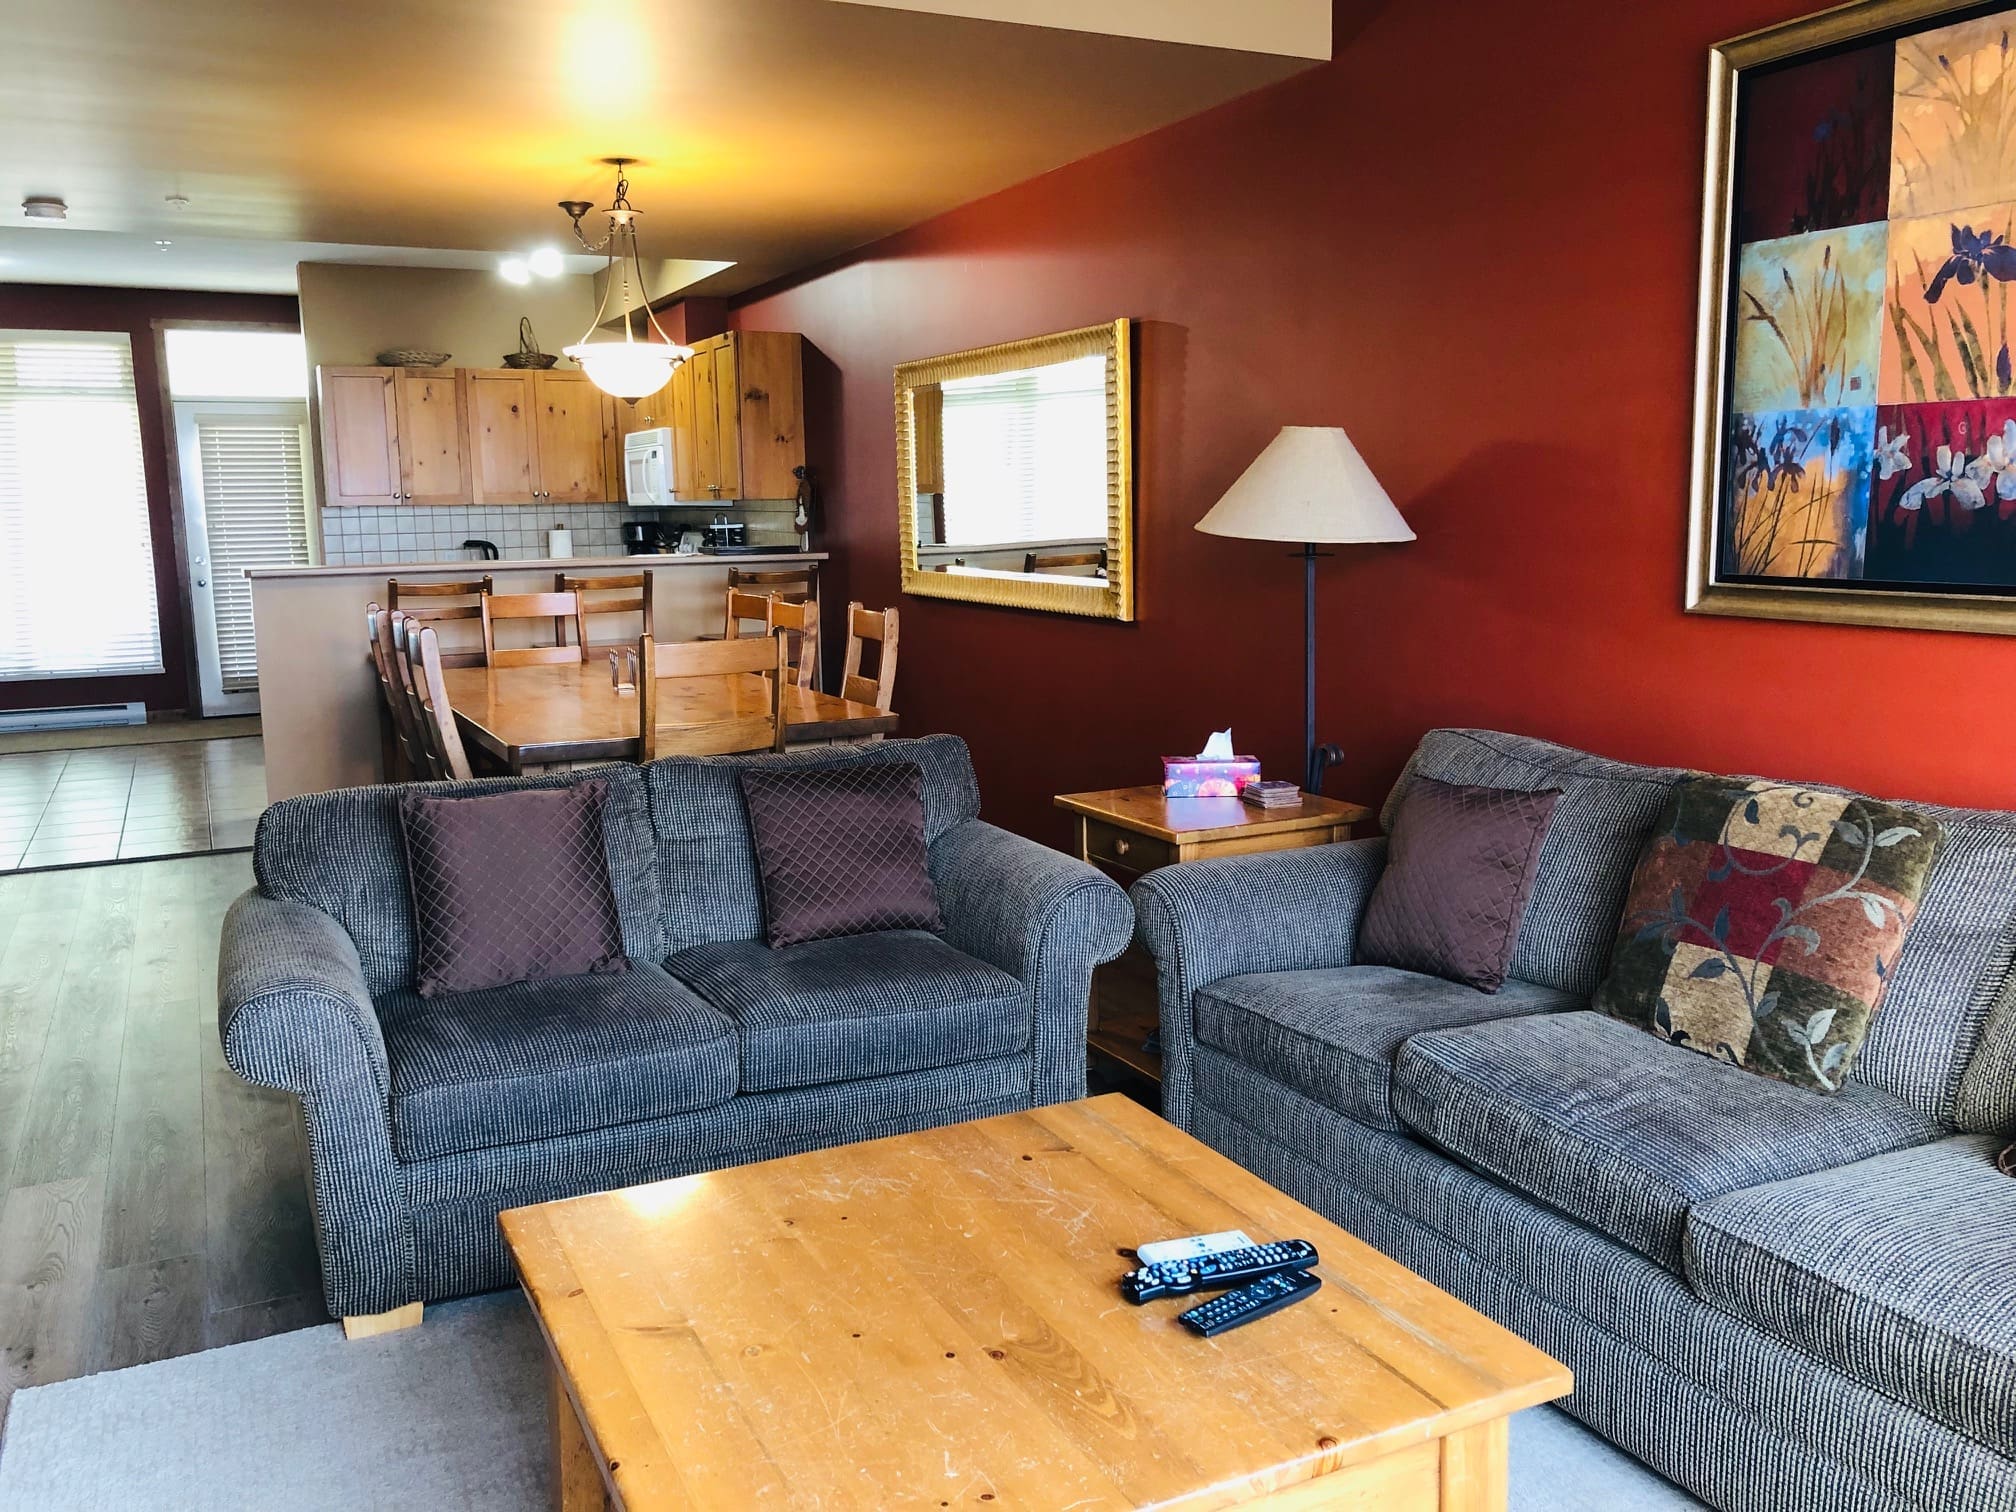 Main floor of 3 level townhouse at Creekside with open living area, dining table, gas fireplace, TV. Private hot tub, laundry, garage, and great ski in and out access from unit.